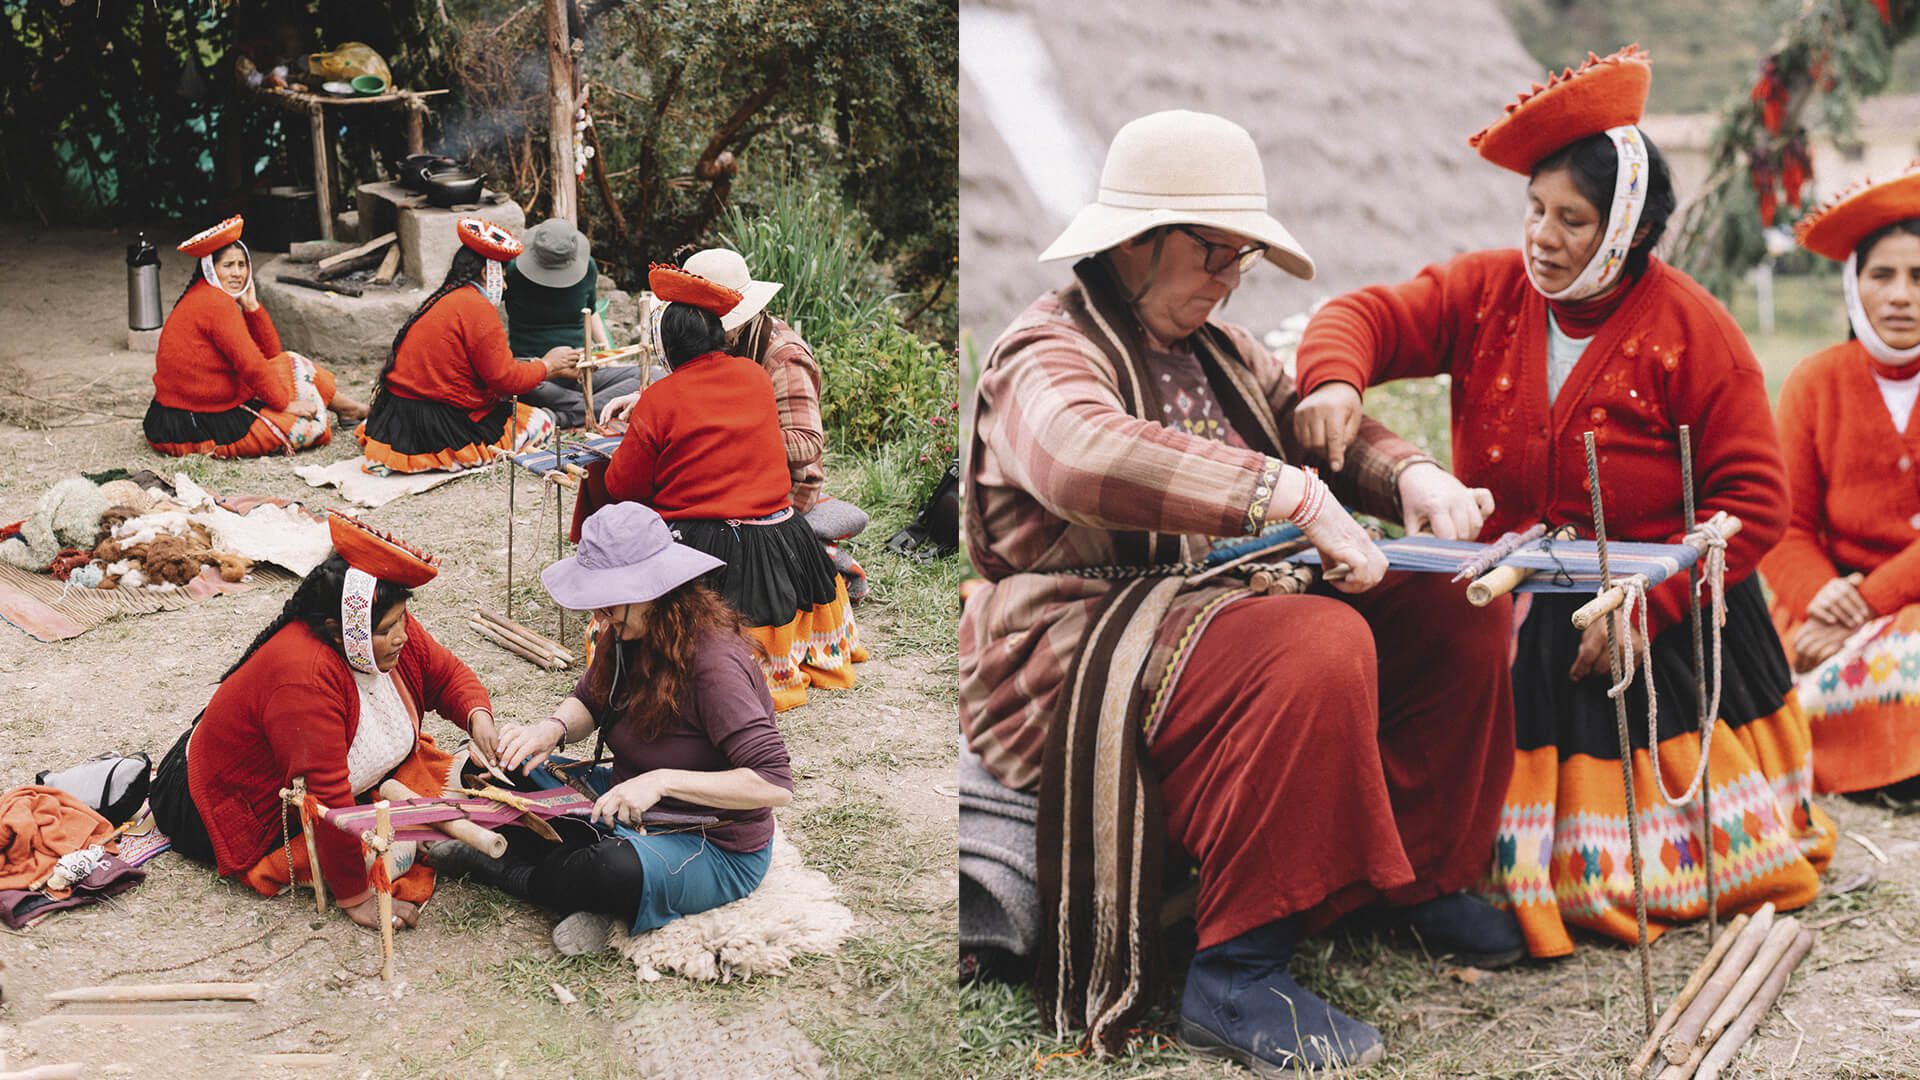 Enjoy a full day of learning about the Andean culture.